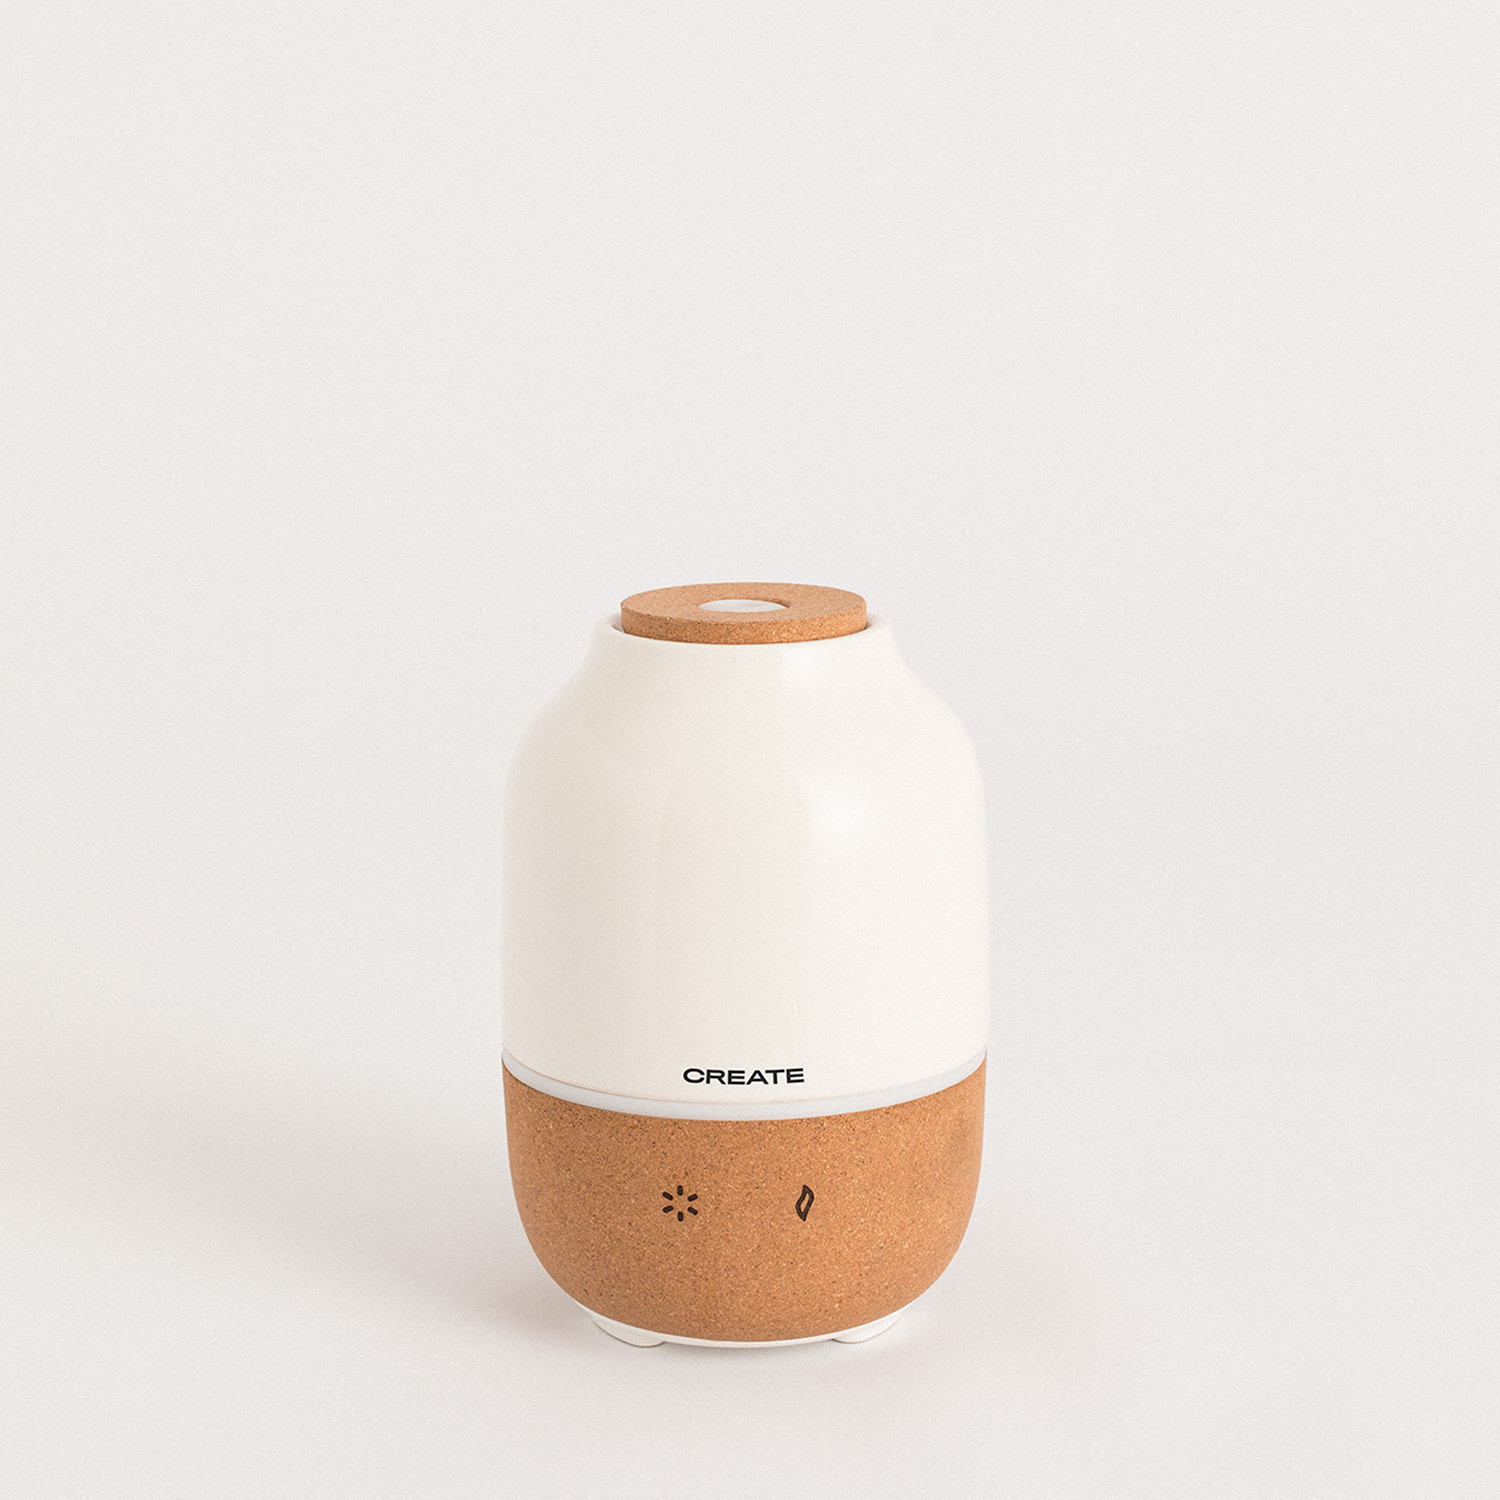 AROMA CERAMIC - Aroma and humidifier with light - Create Ikohs